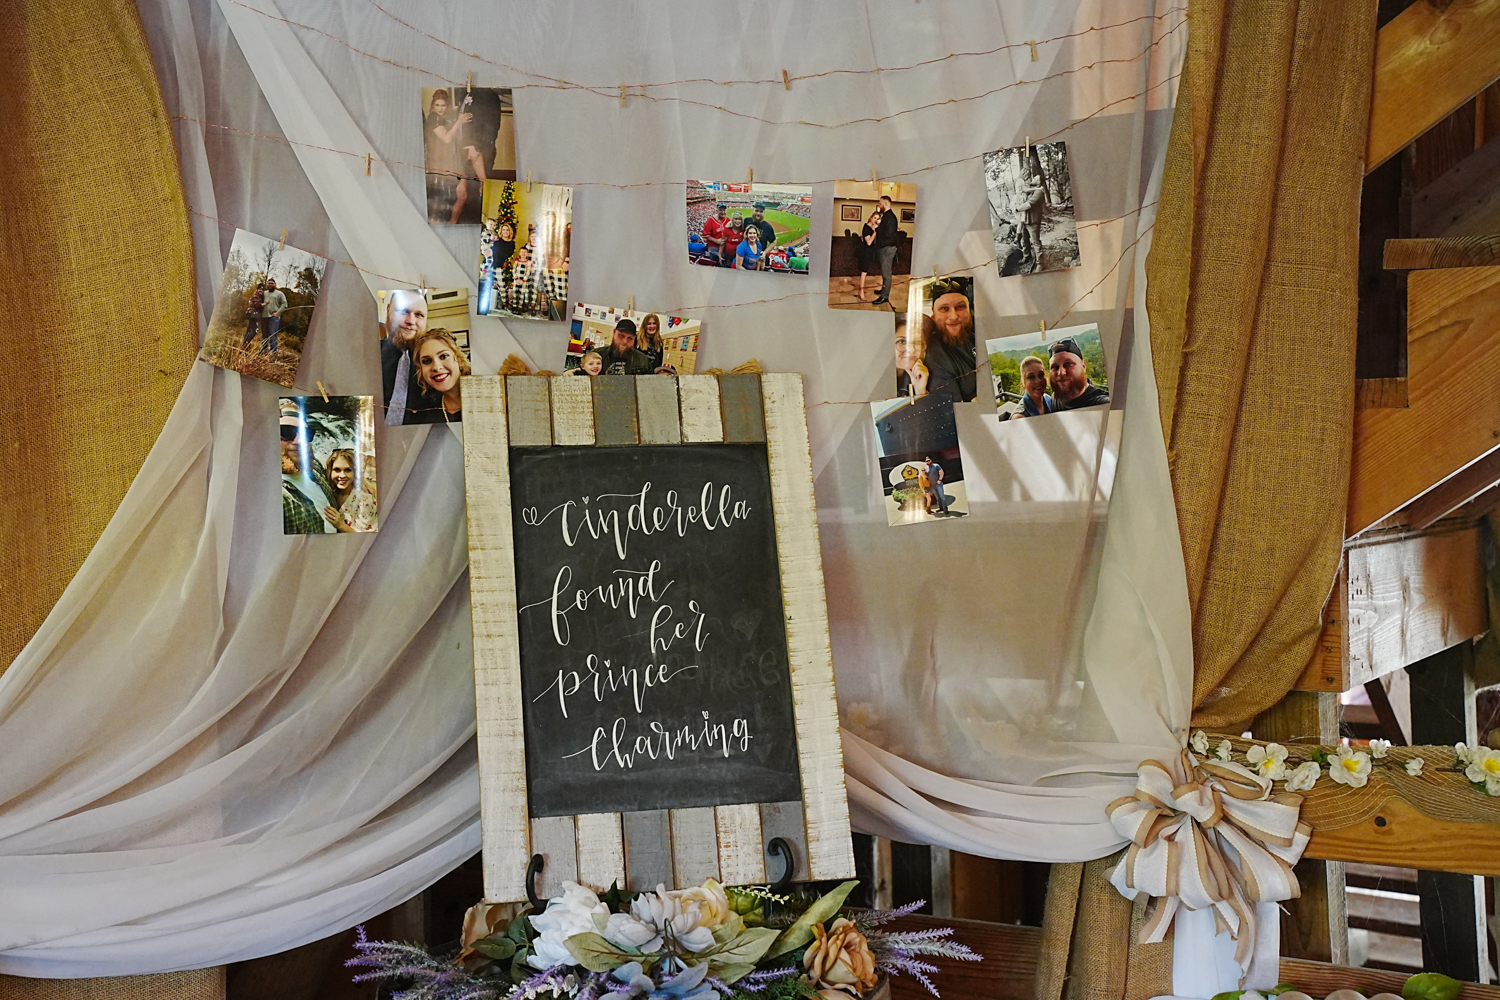 Pictures hung on clothes pins in an entry way to a barn wedding venue with a cinderella met her prince charming sign